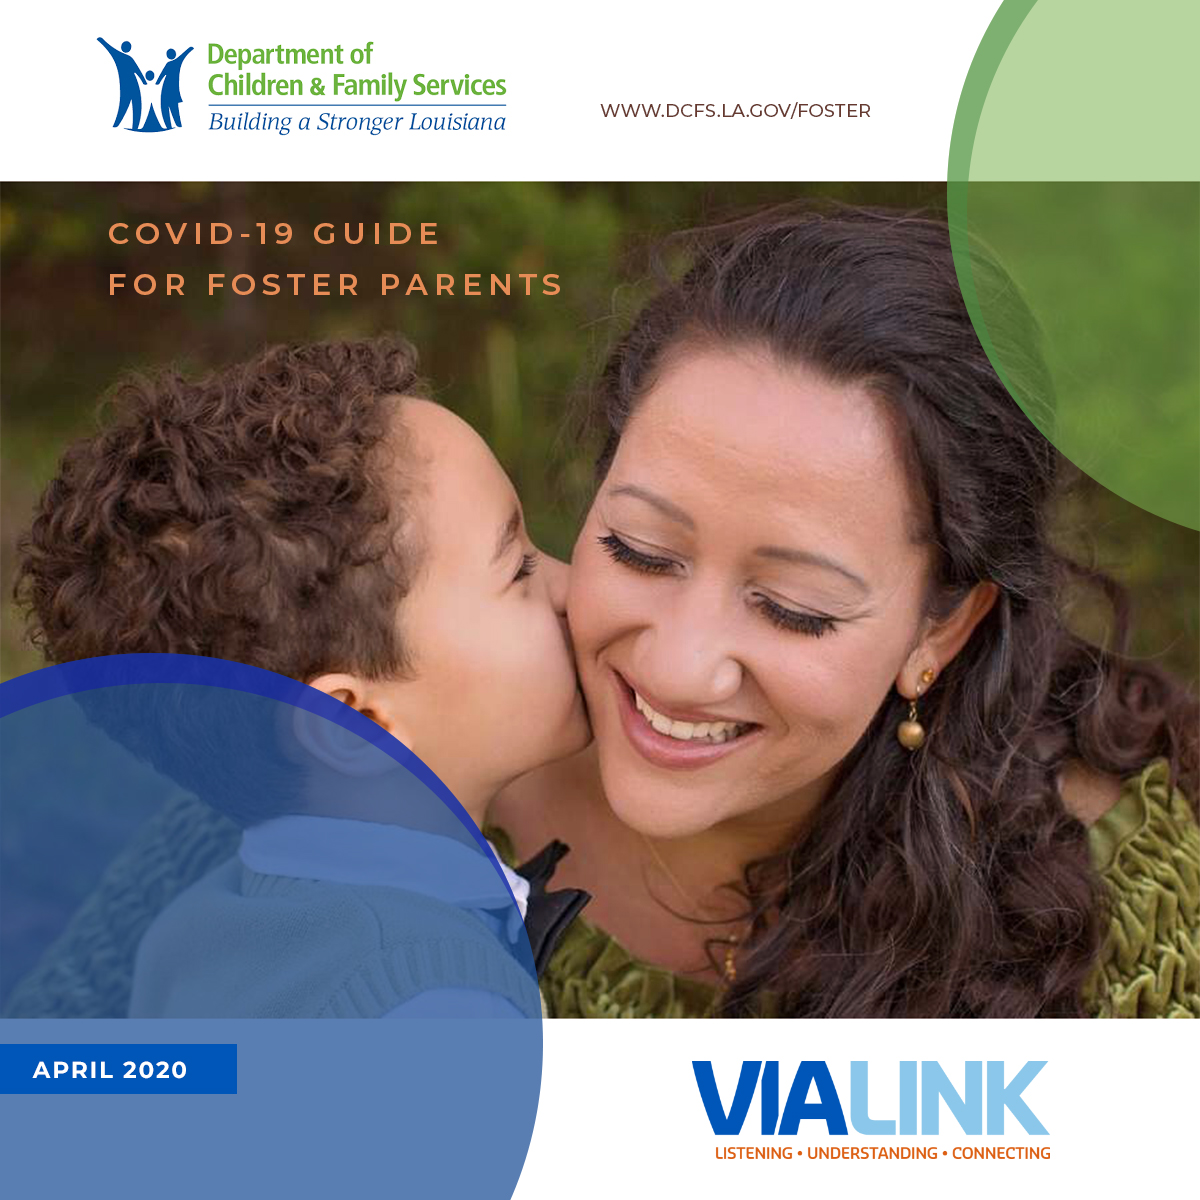 Louisiana Fosters – Resources for Foster Families During COVID-19